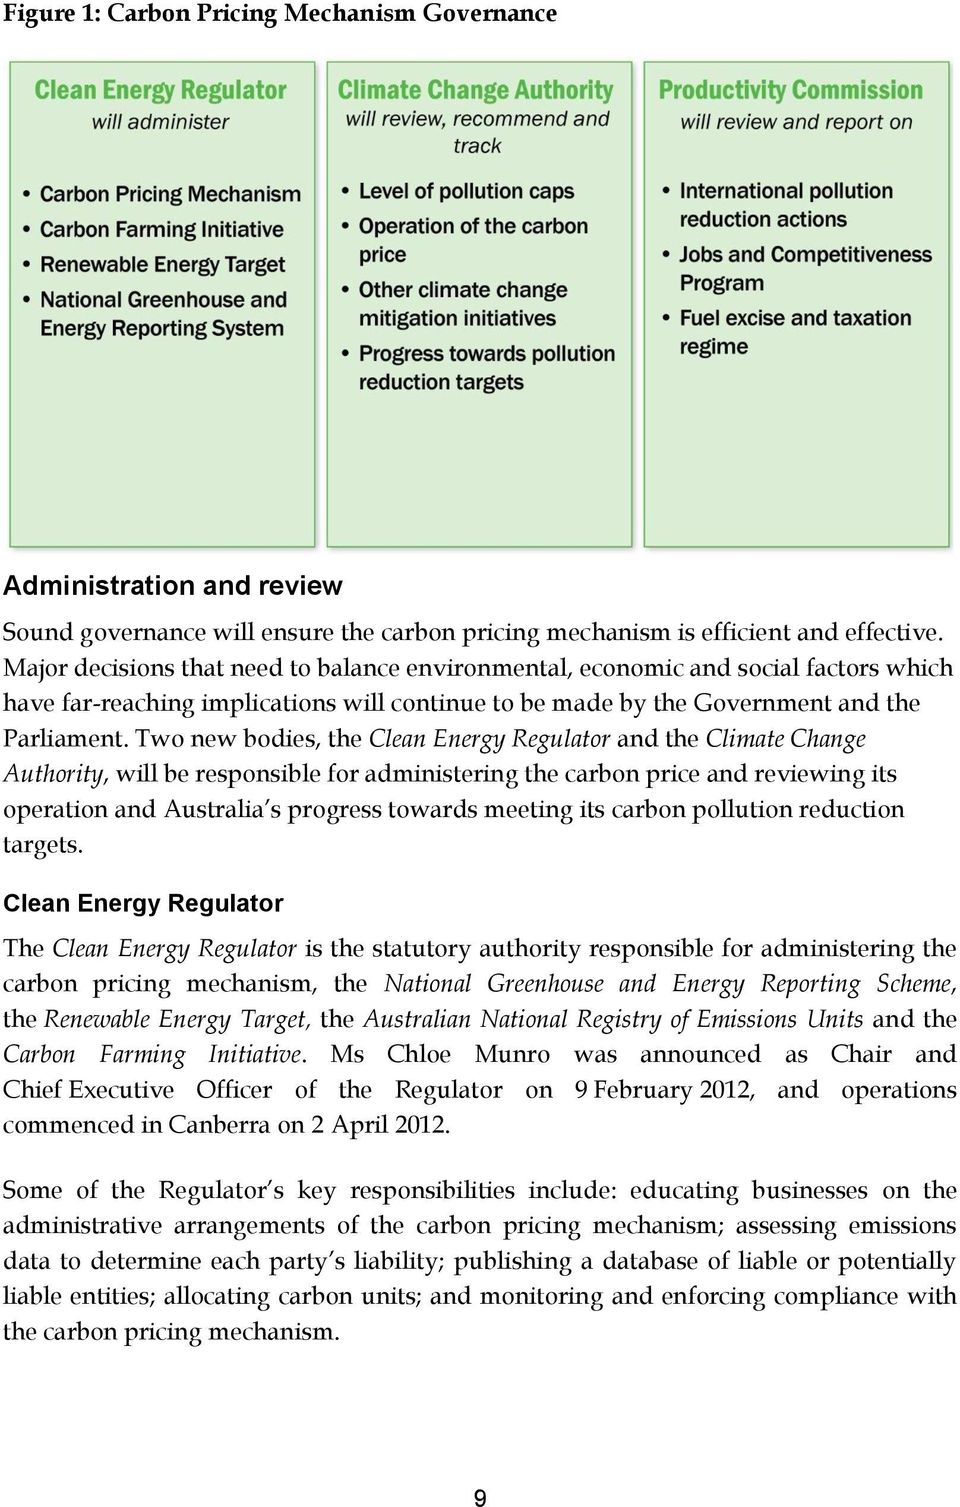 Two new bodies, the Clean Energy Regulator and the Climate Change Authority, will be responsible for administering the carbon price and reviewing its operation and Australia s progress towards